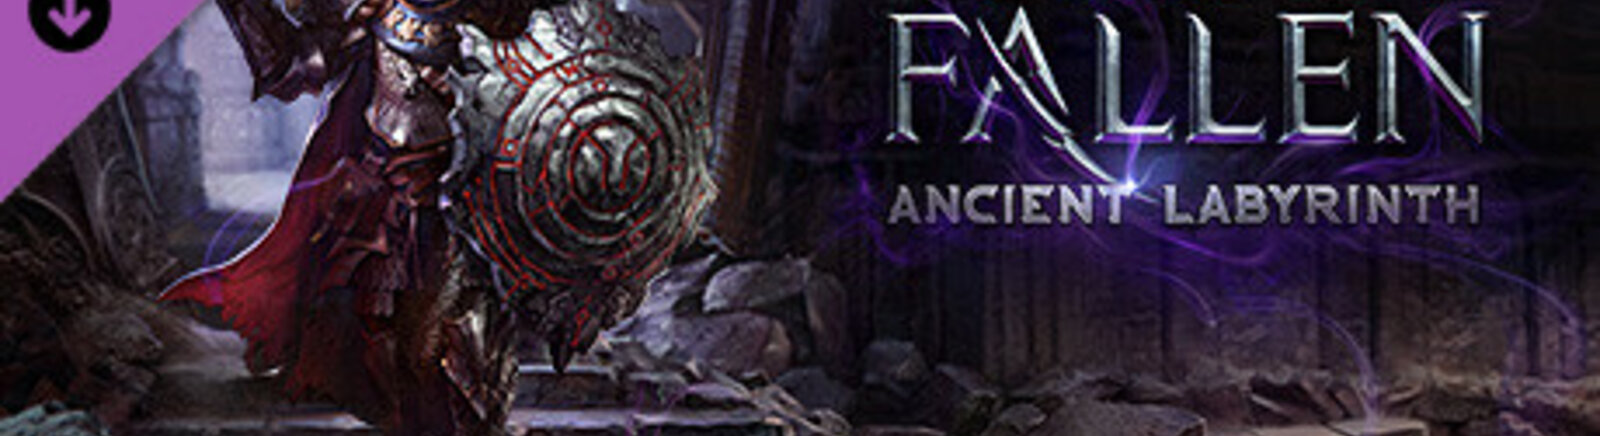 Lords of the Fallen - Ancient Labyrinth